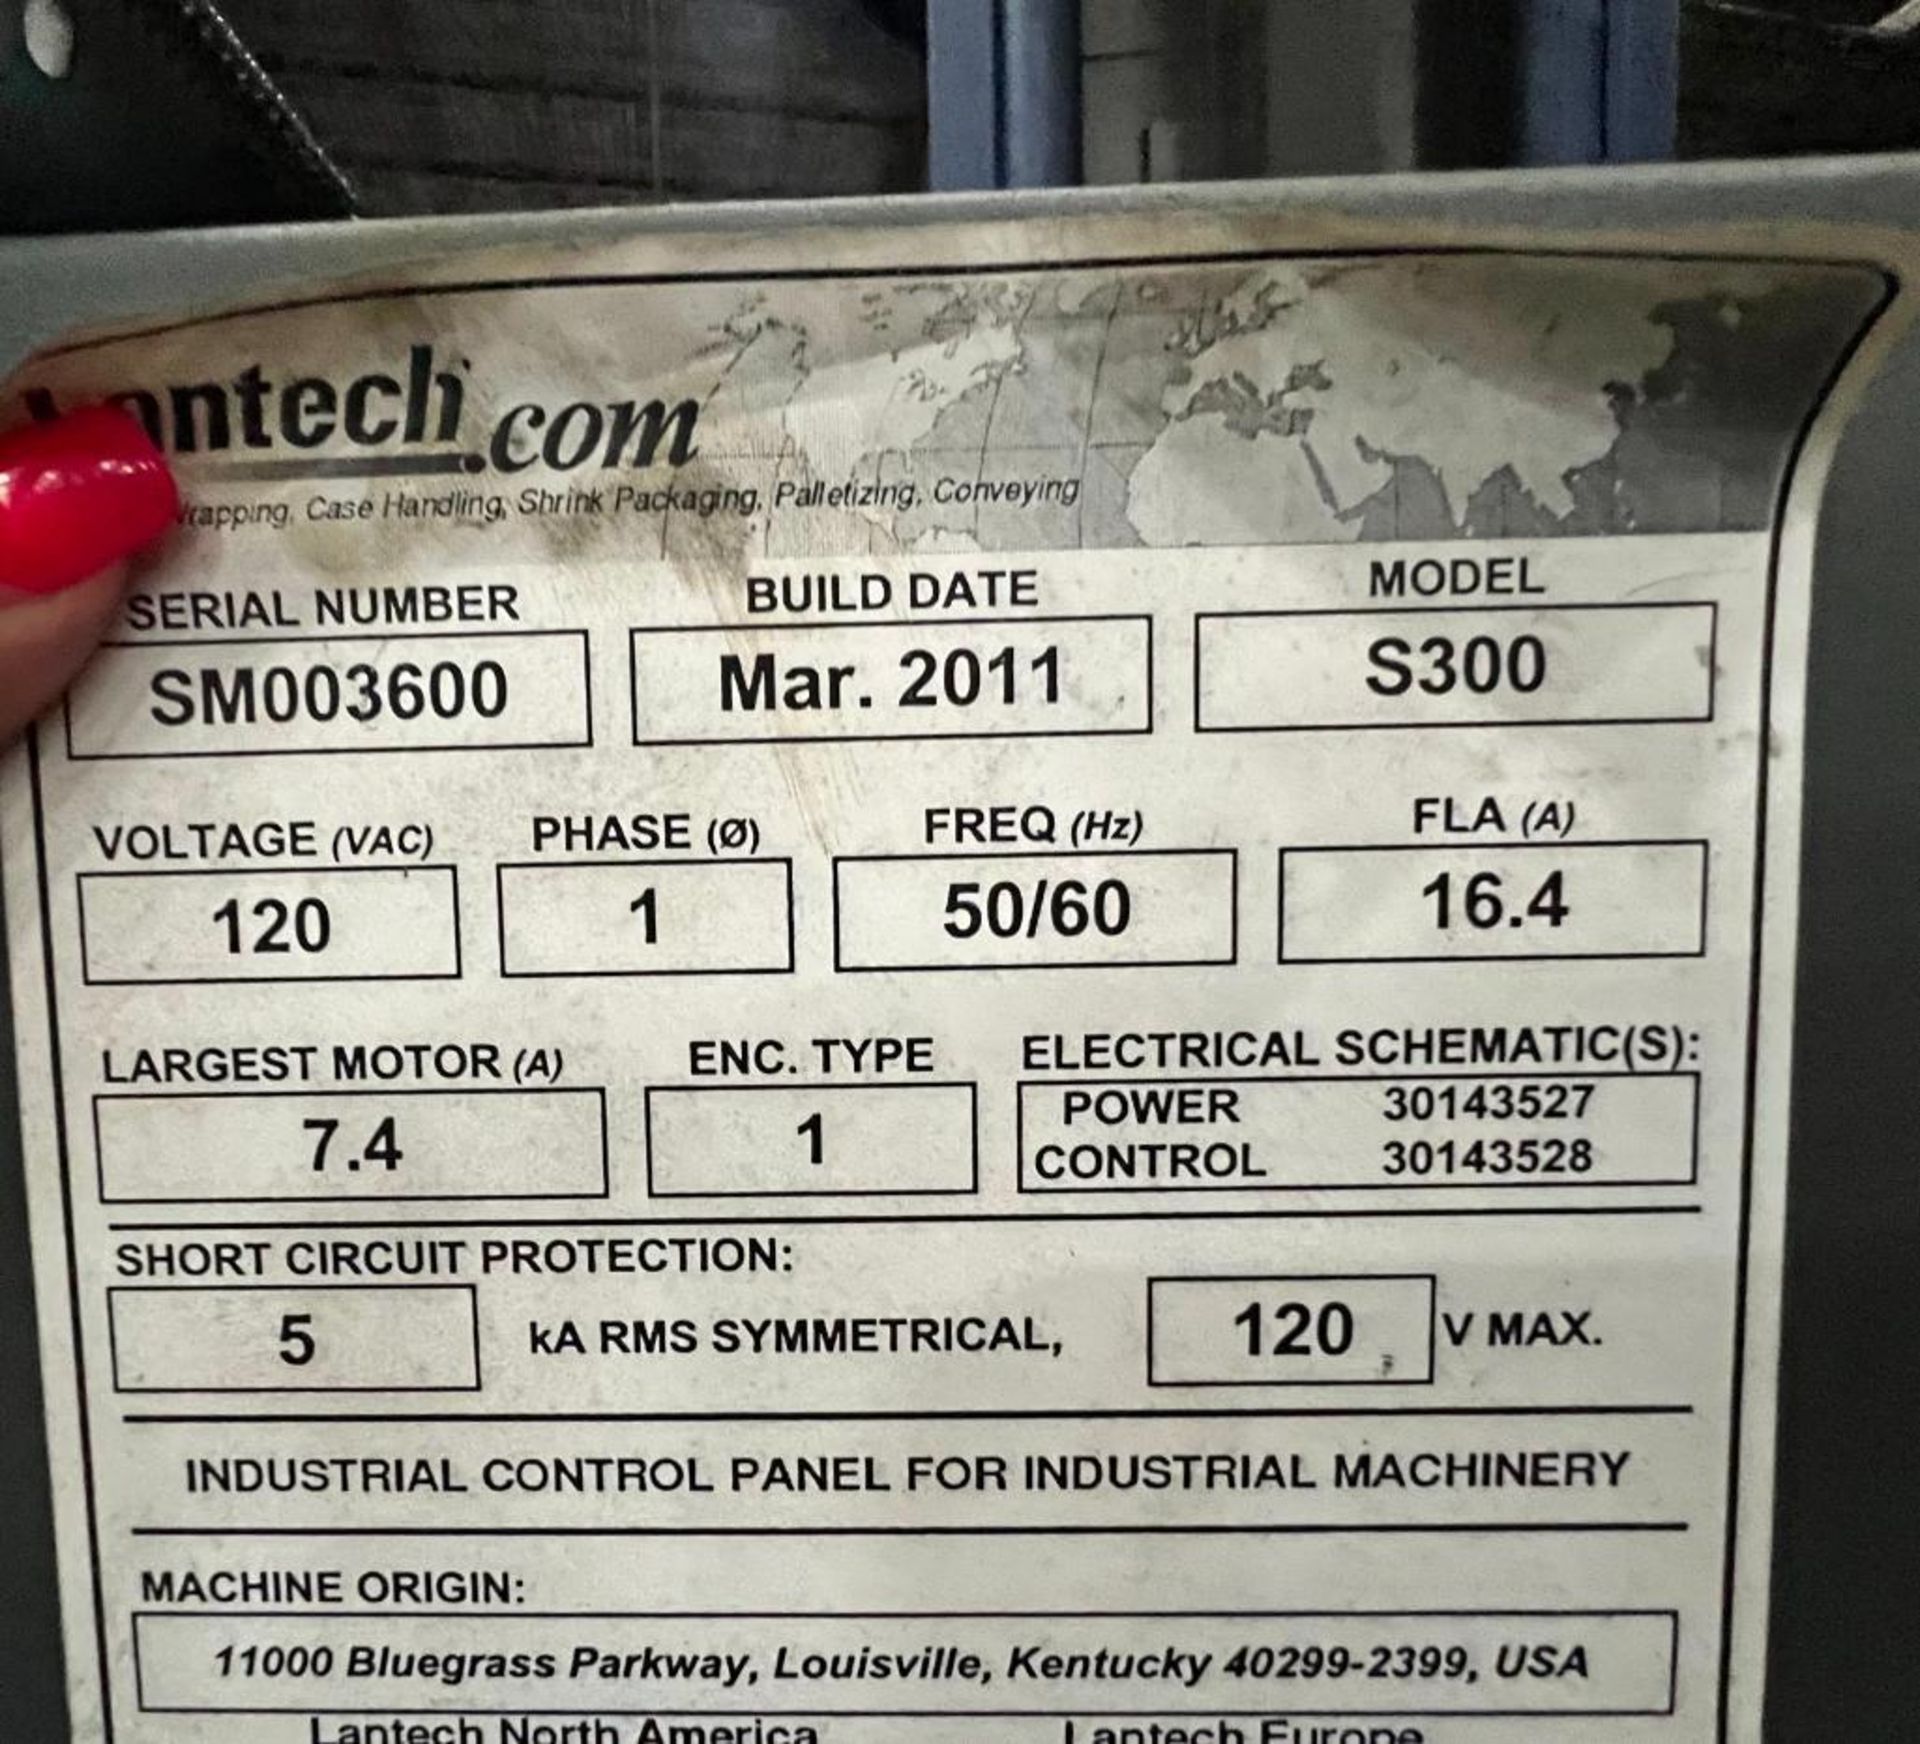 2011 Lantech Stretch Wrapper Machine, Model S300, S/N SM003600, Single Phase ($100 Loading fee will - Image 4 of 4